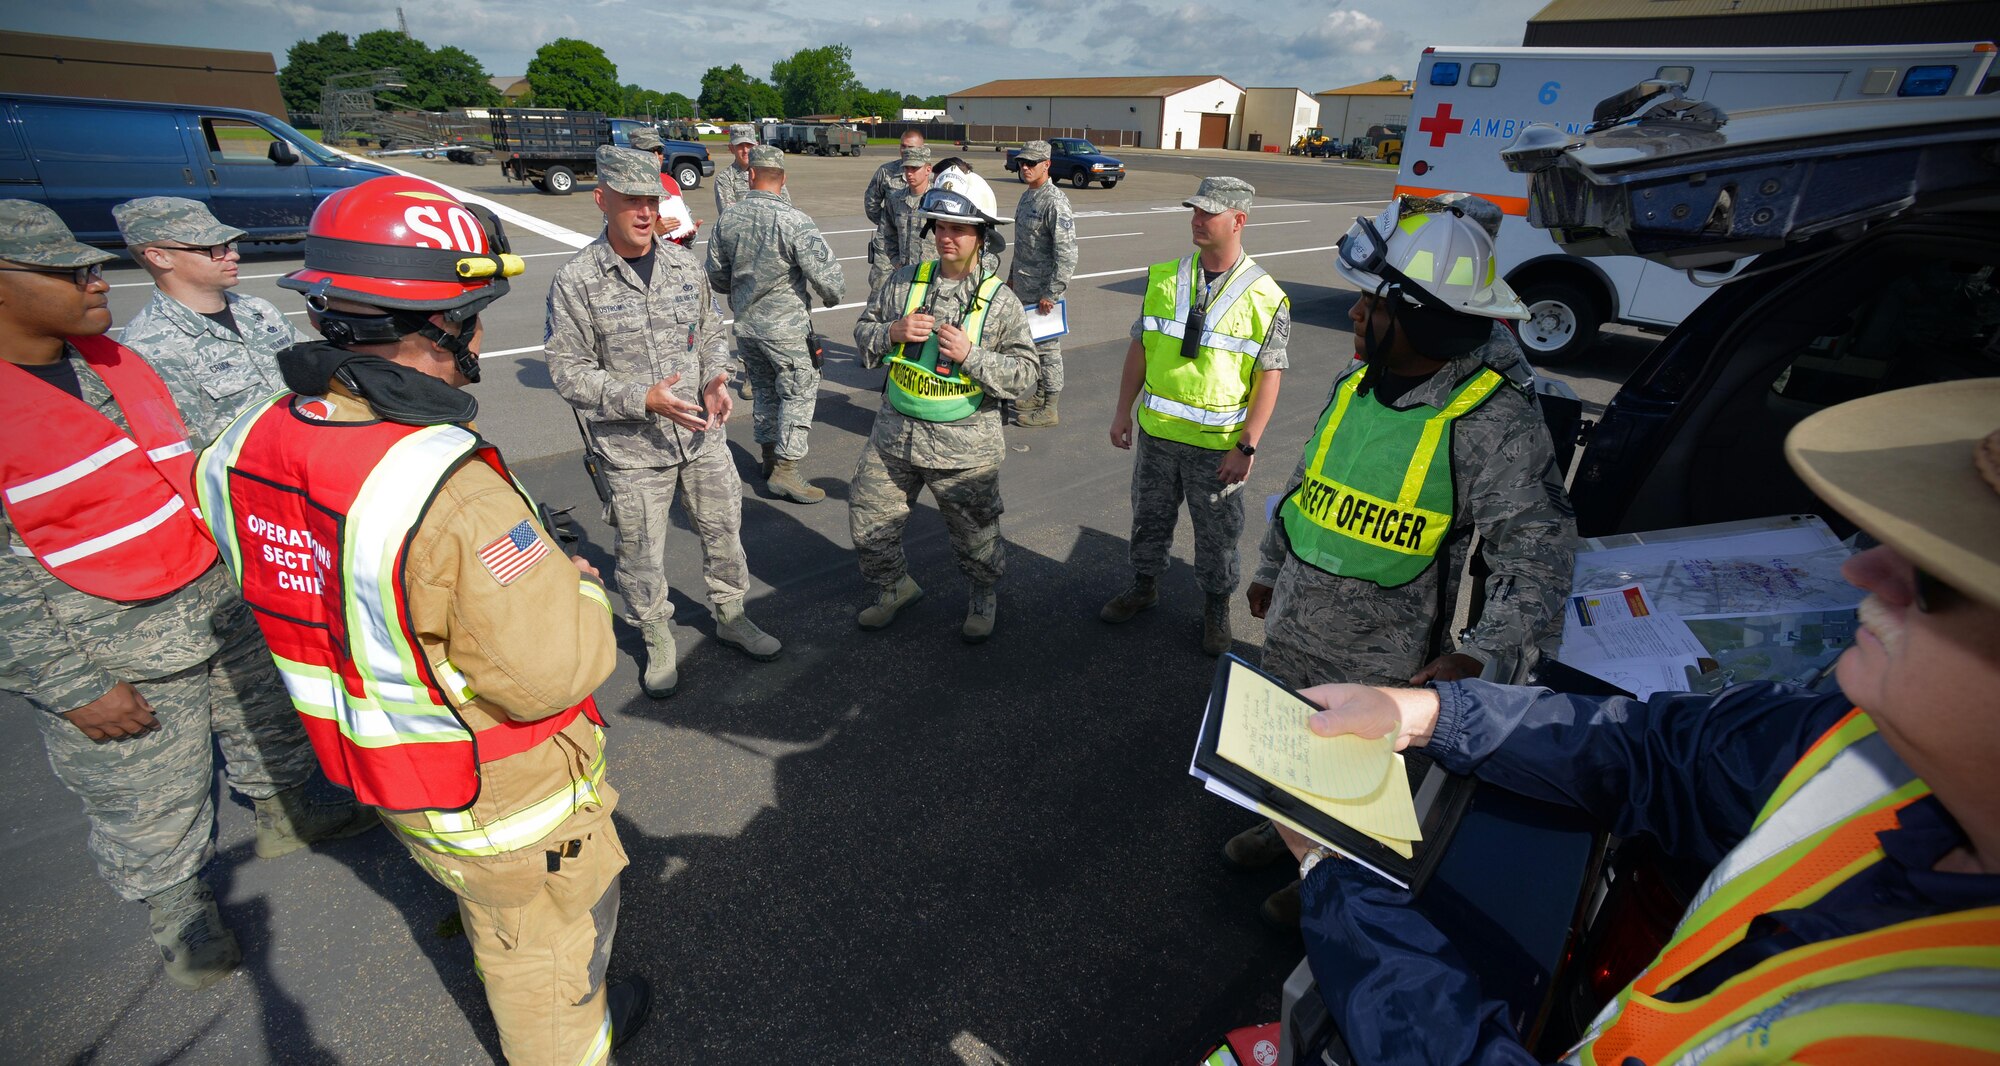 U.S. Air Force Airmen discuss a plan of action during an exercise July 16, 2016, on RAF Mildenhall, England. The exercise tested first responders during a simulated fuel spill. (U.S. Air Force photo by Senior Airman Christine Halan)